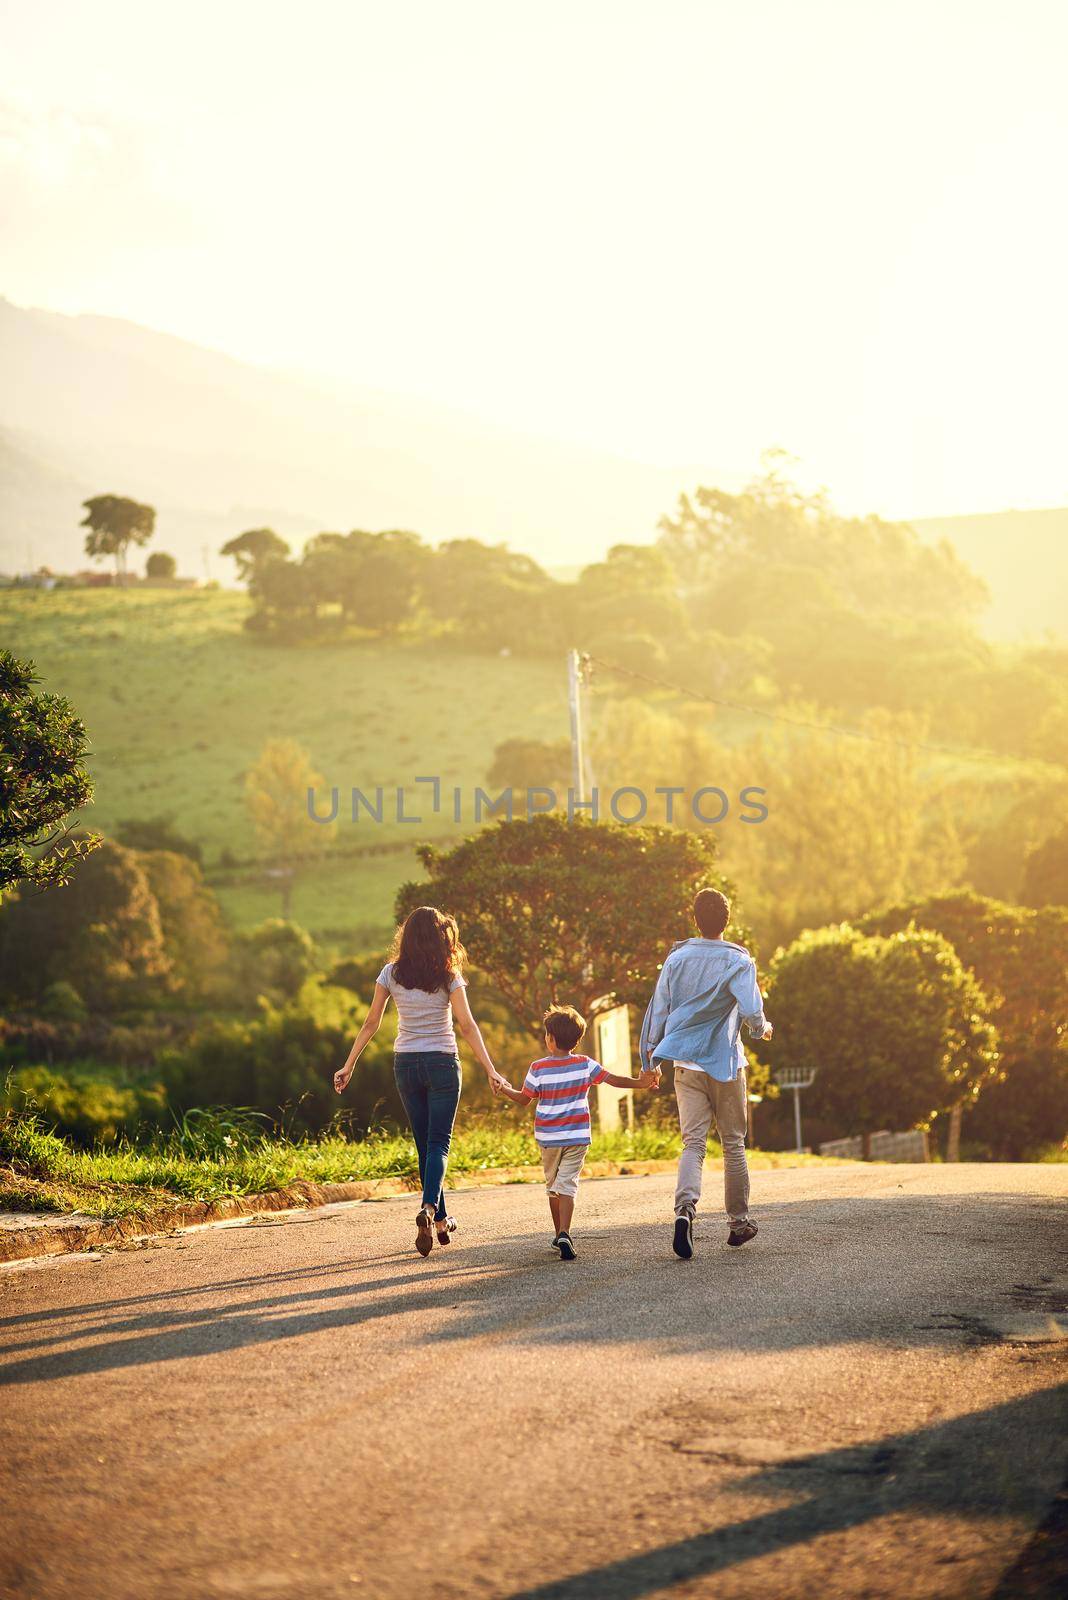 Rearview shot of a family walking in the countryside.